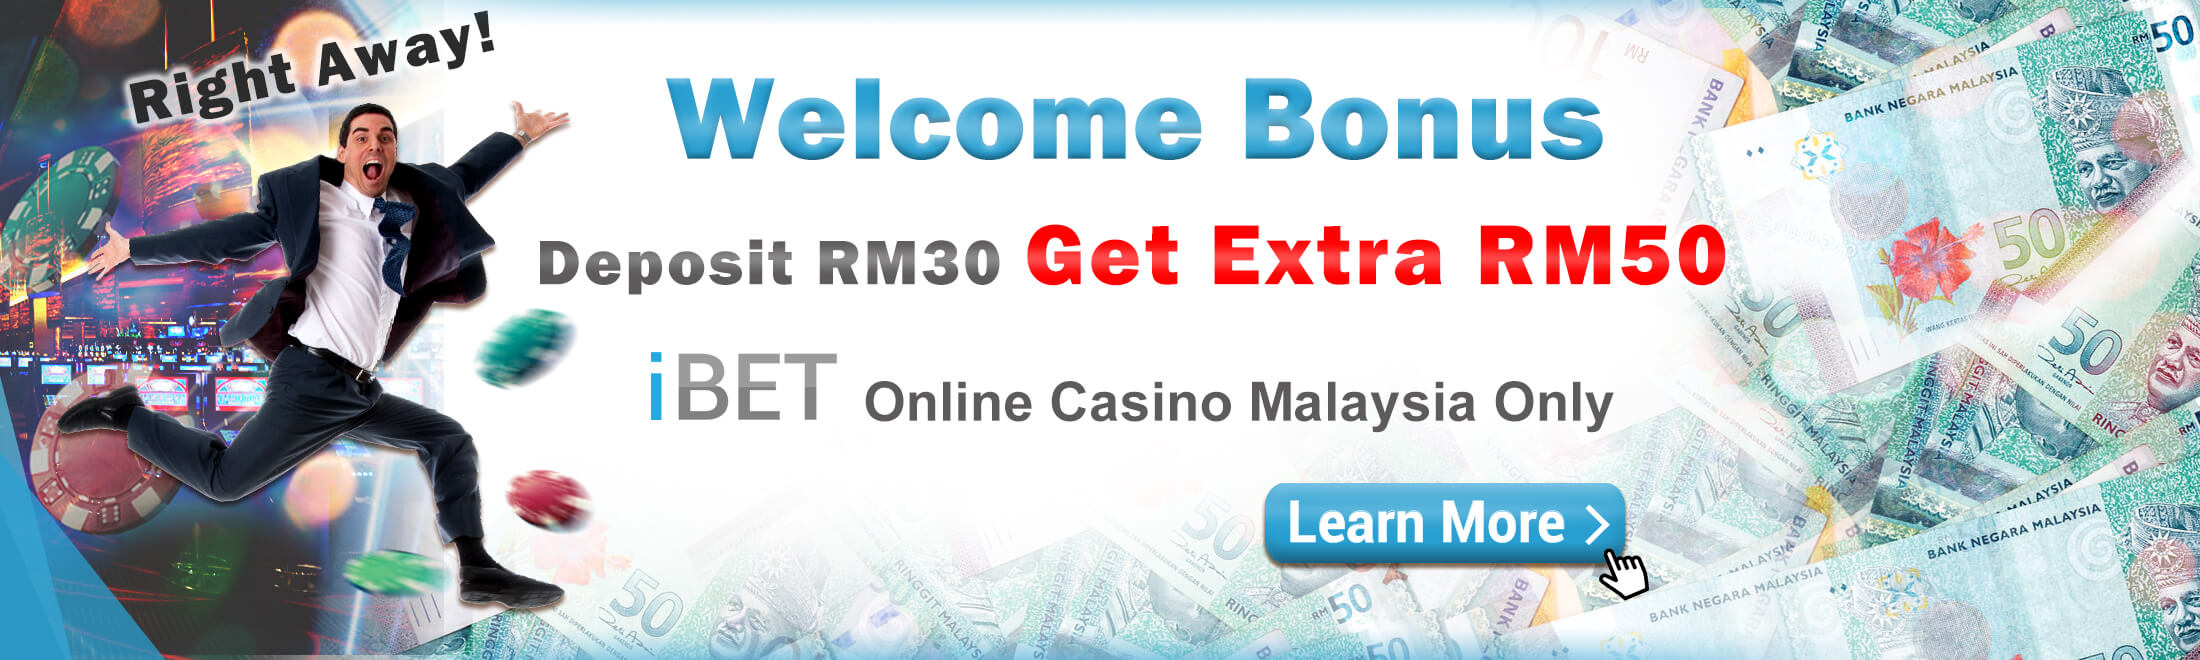 Free RM 50!!! iBET Online Casino Malaysia Only